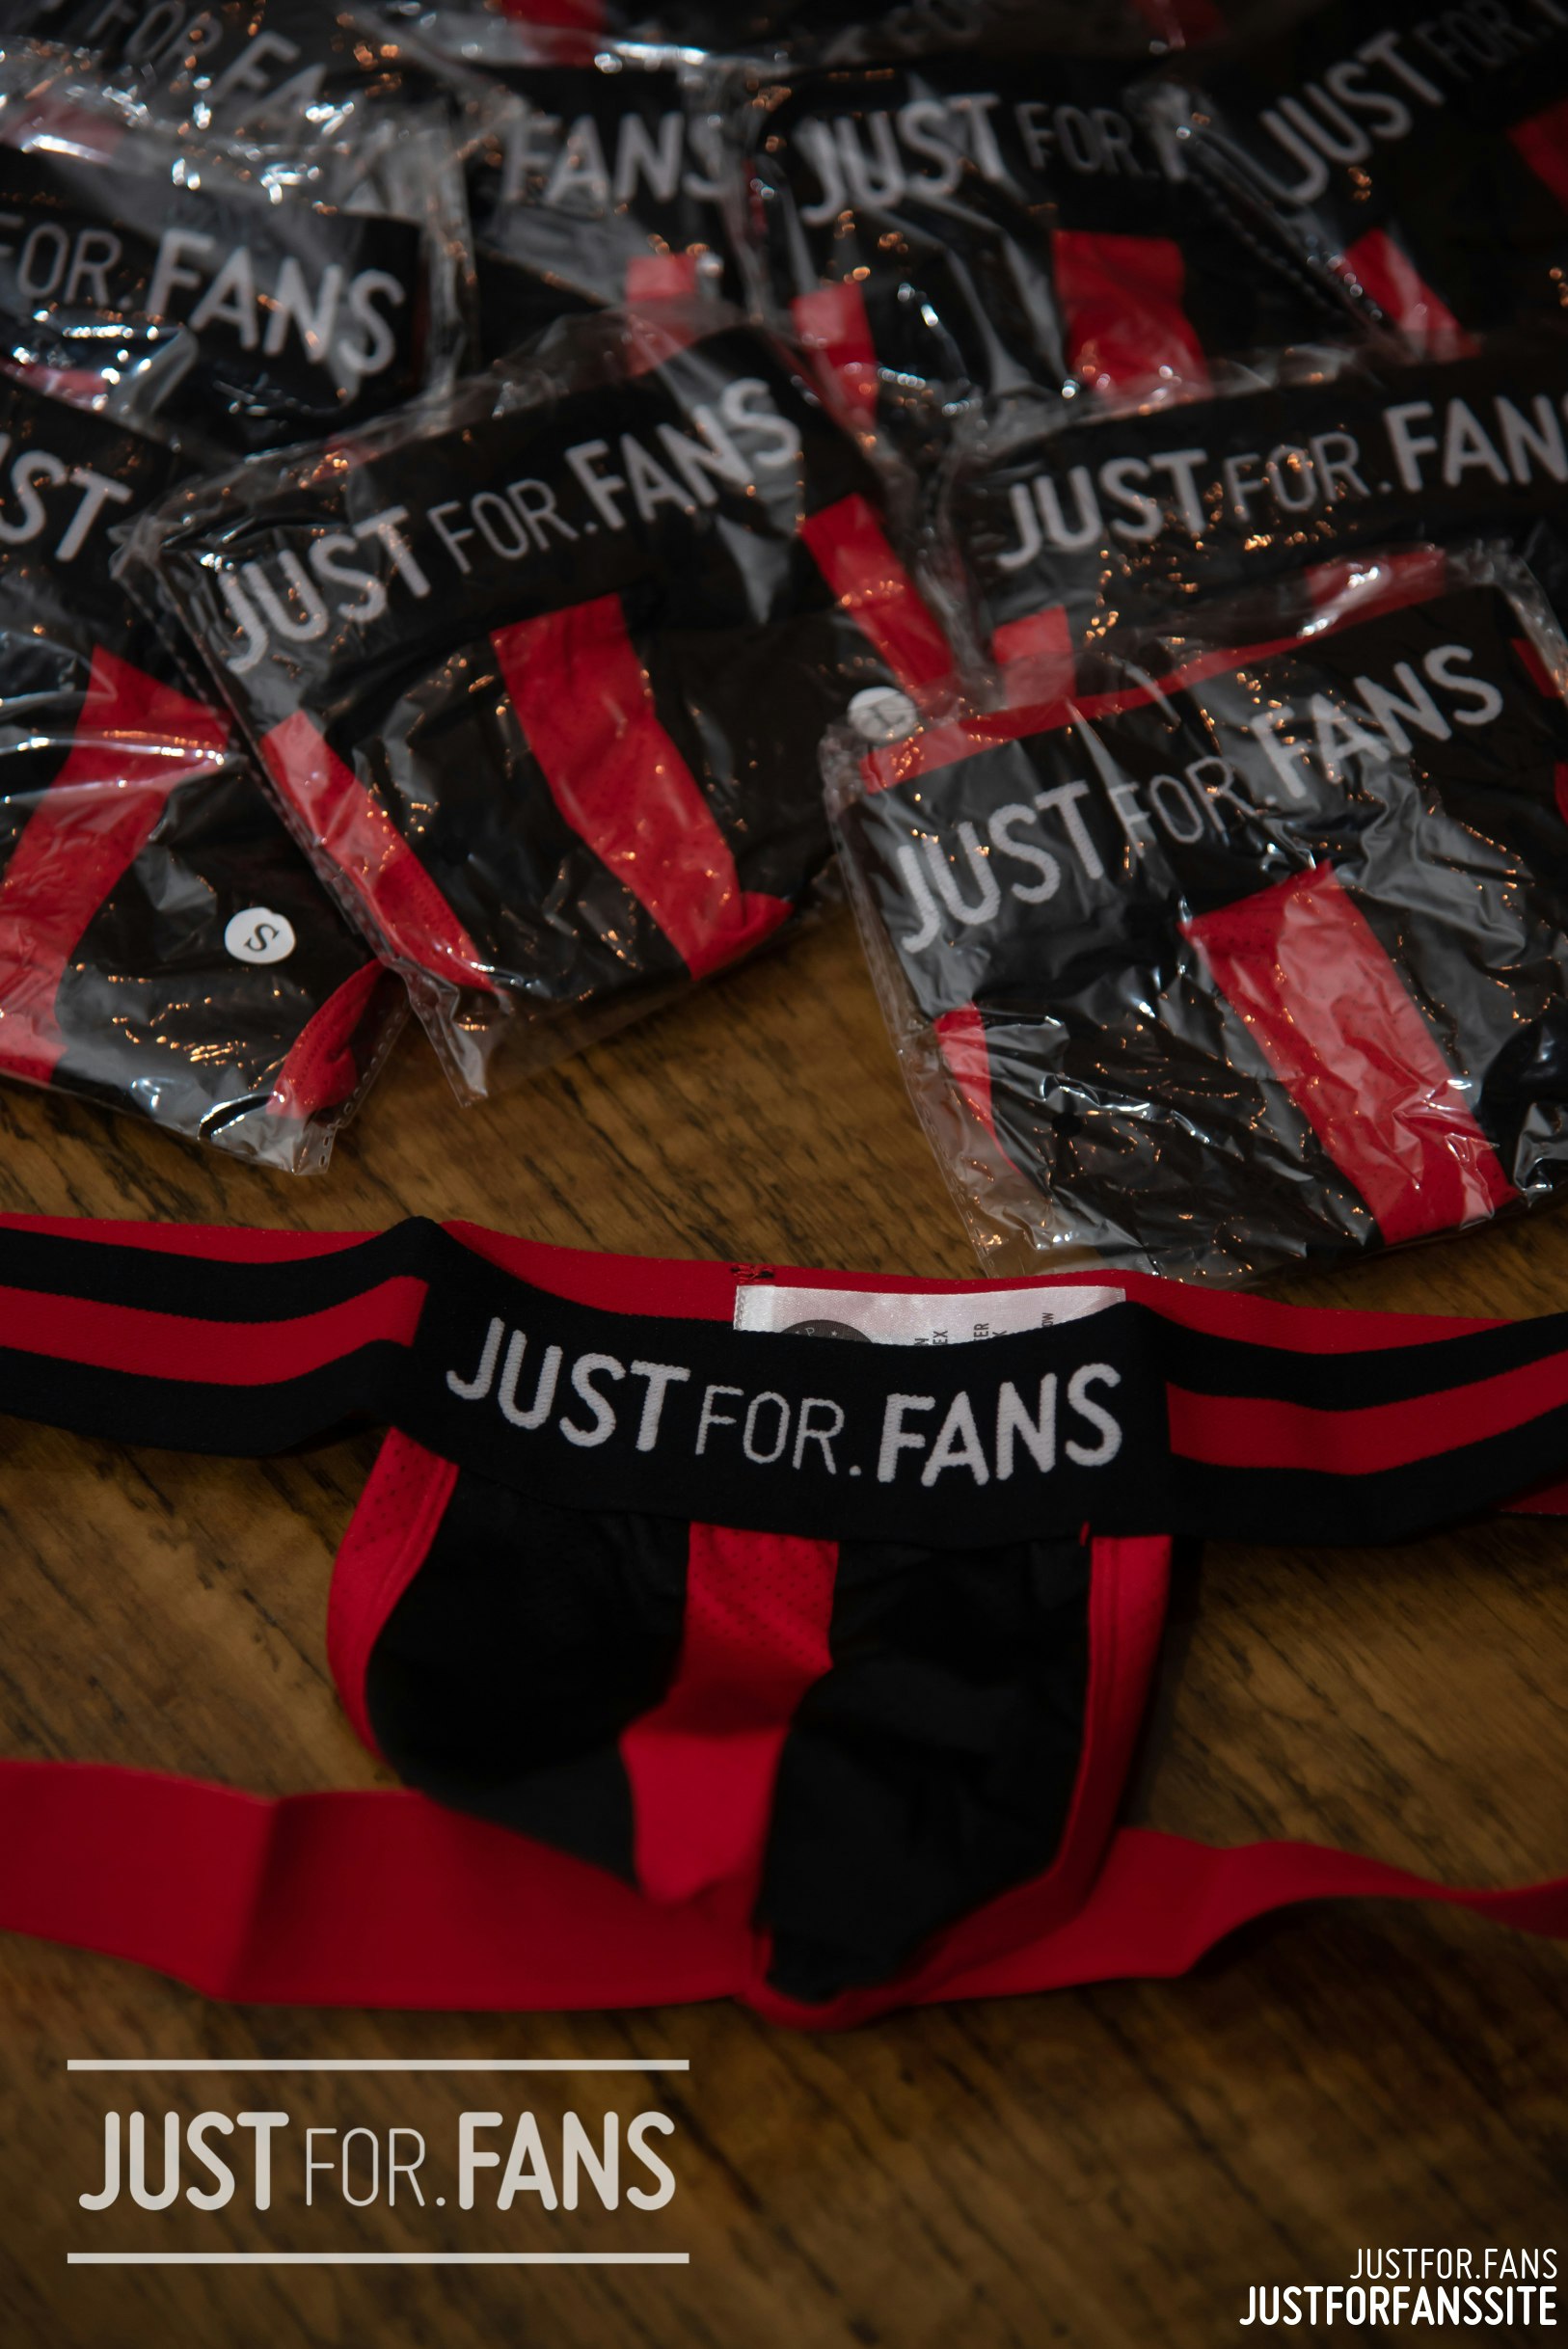 A pile of JustFor.Fans jock straps sit on a table - but aside from the merch, is it a good OnlyFans alternative?